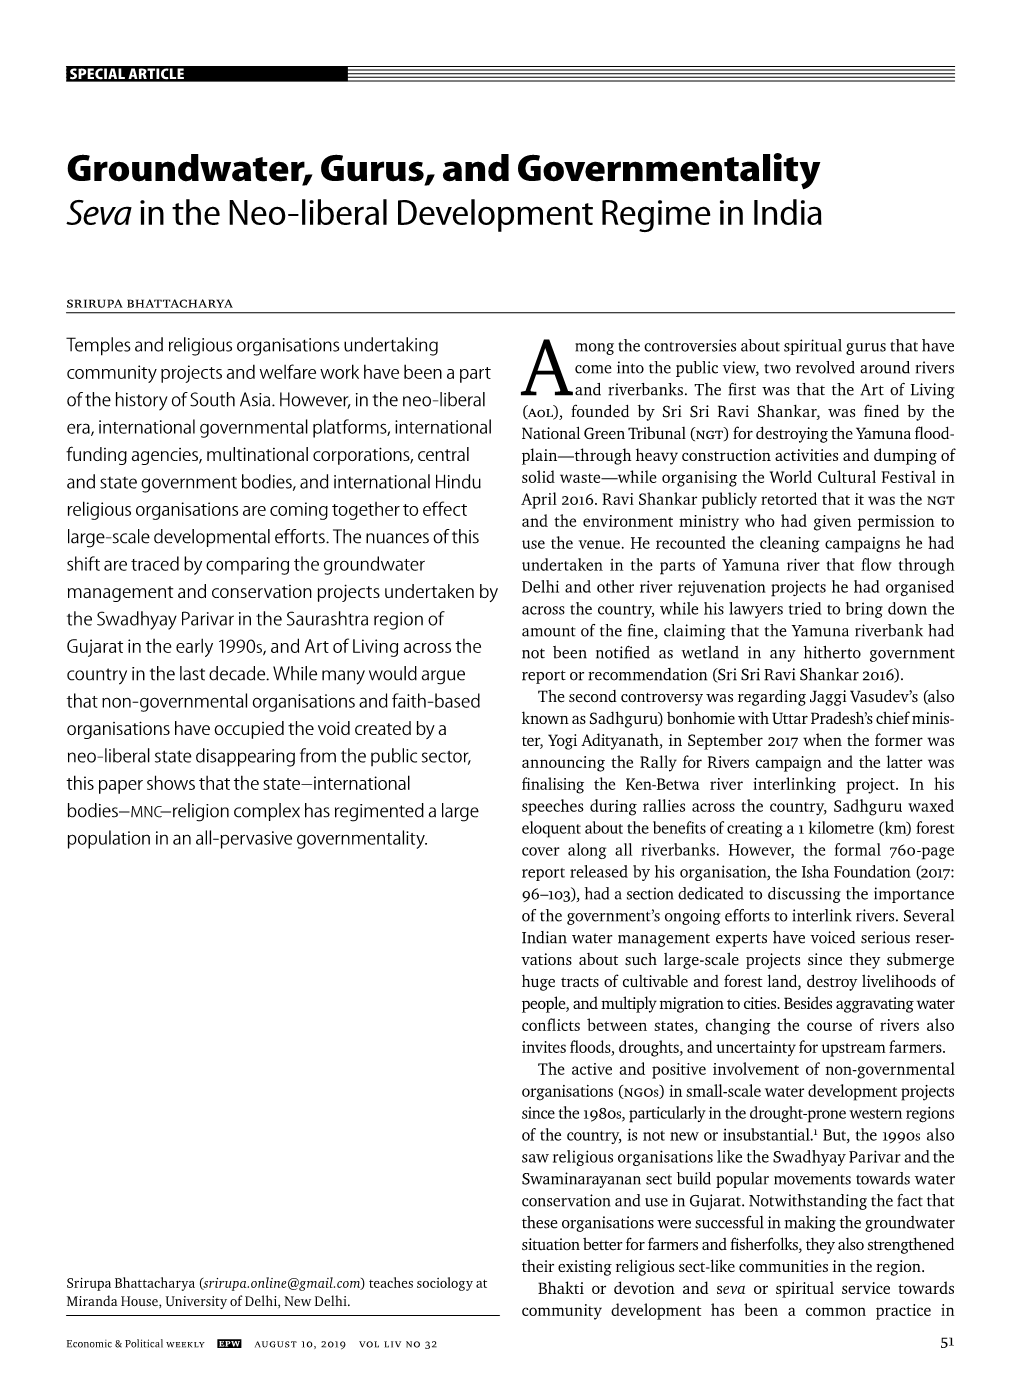 Groundwater, Gurus, and Governmentality Seva in the Neo-Liberal Development Regime in India